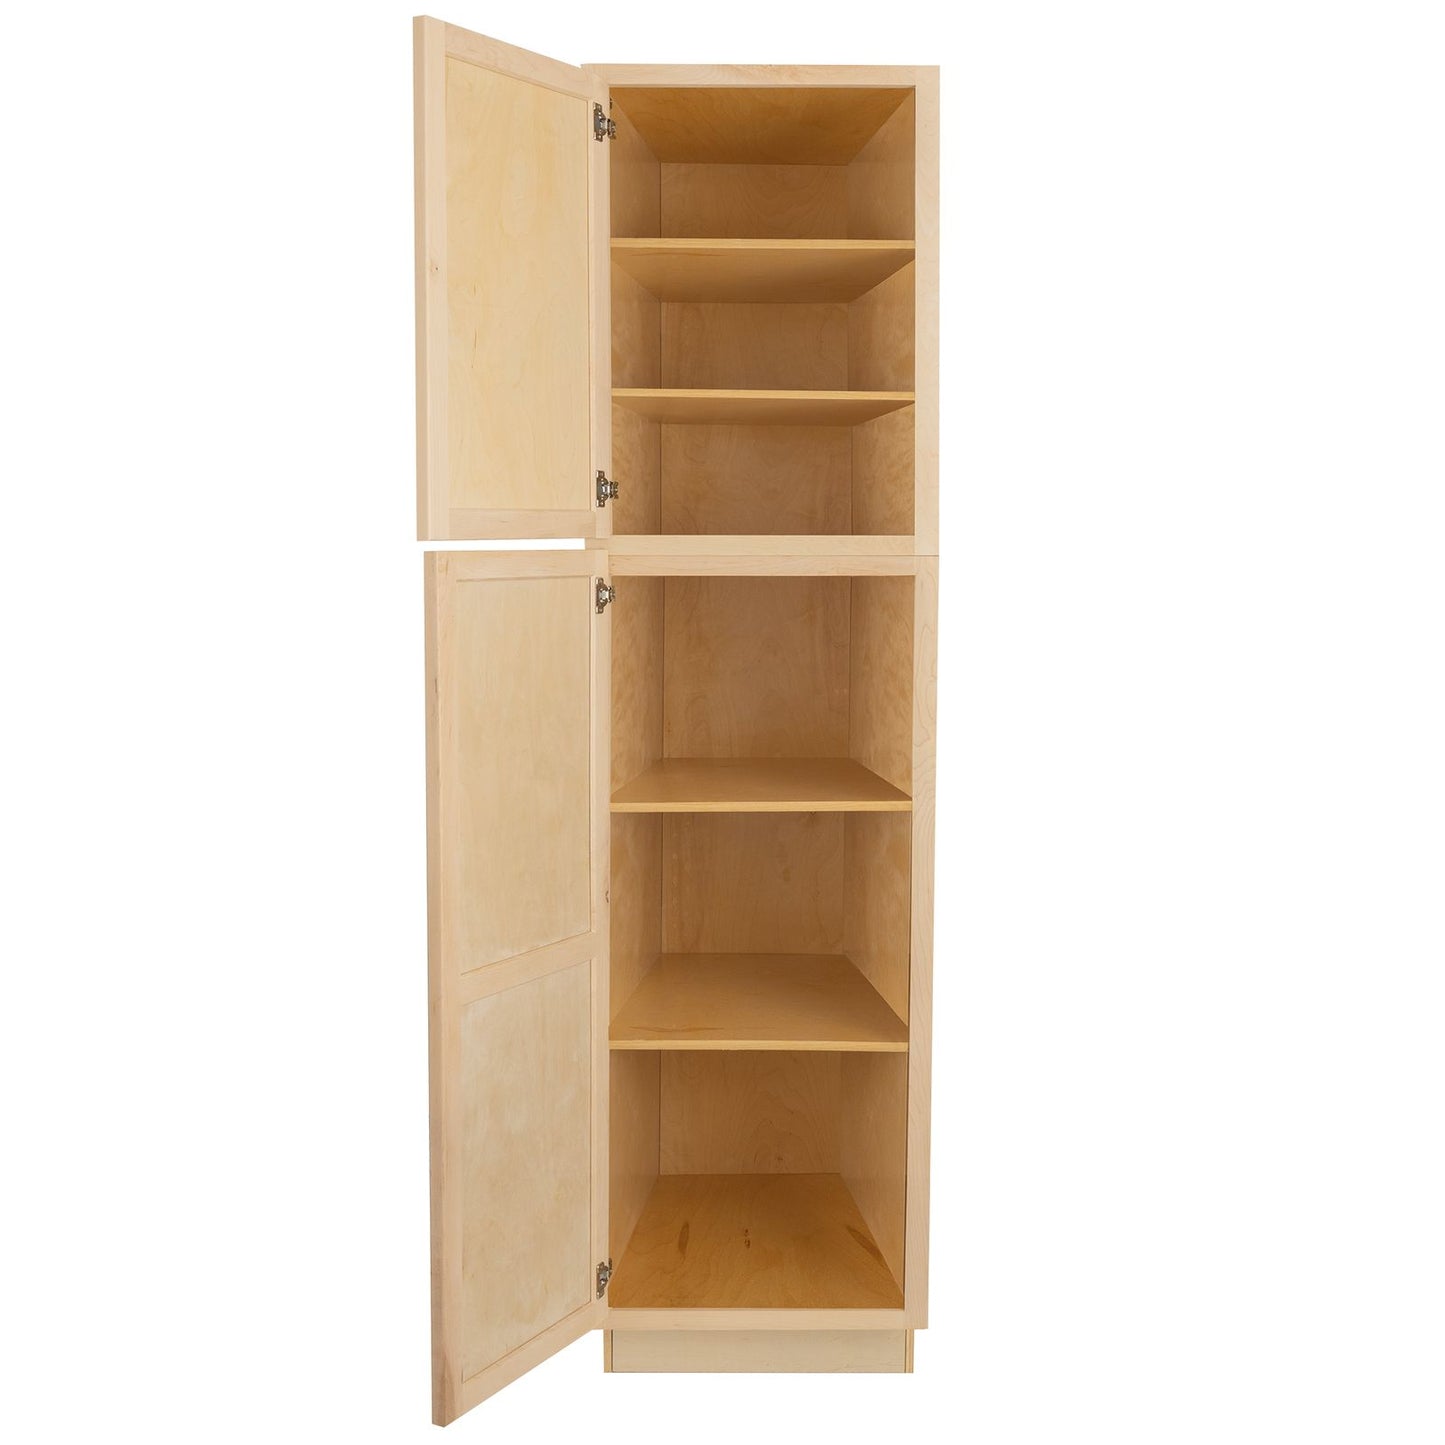 Quicklock RTA (Ready-to-Assemble) Raw Maple Pantry Cabinet- 24"W x (84", 90", 96"H)